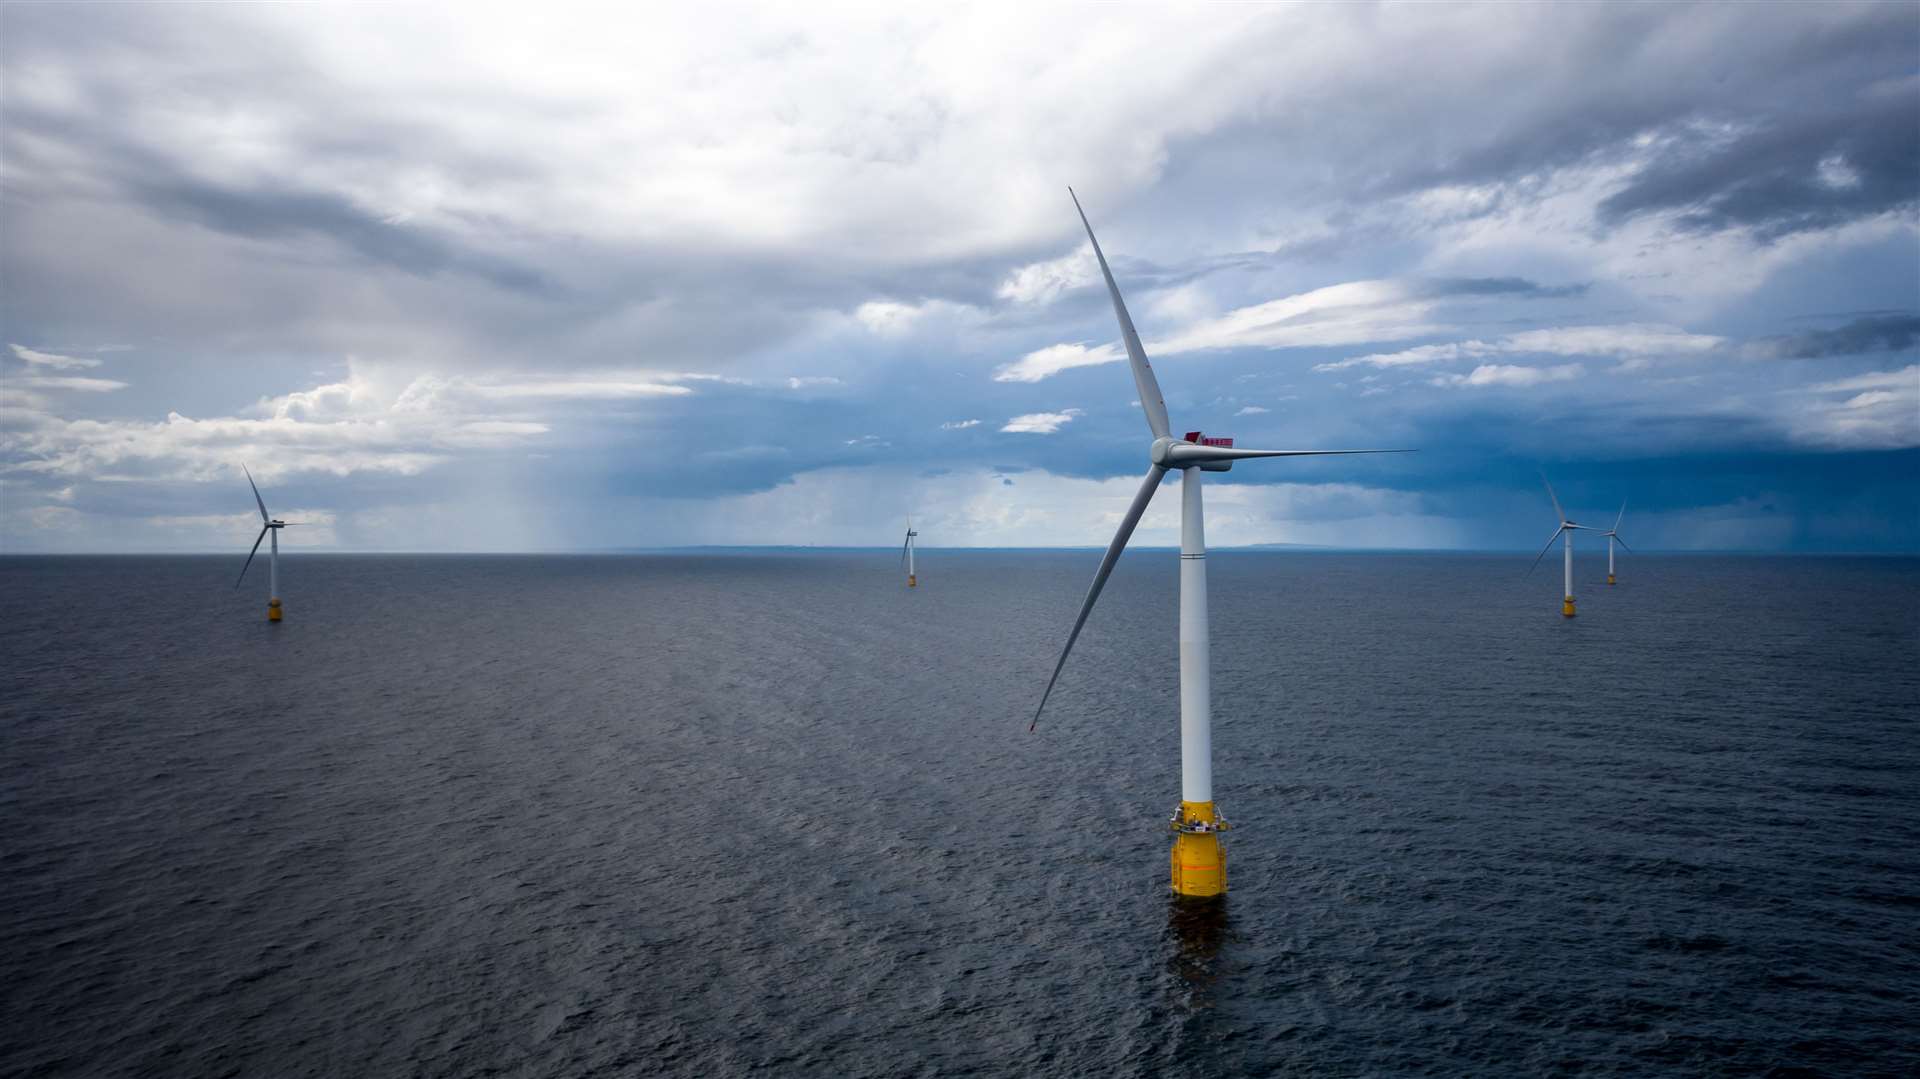 The Hywind Scotland project at Buchan Deep will help Scotland top the offshore wind generation league.